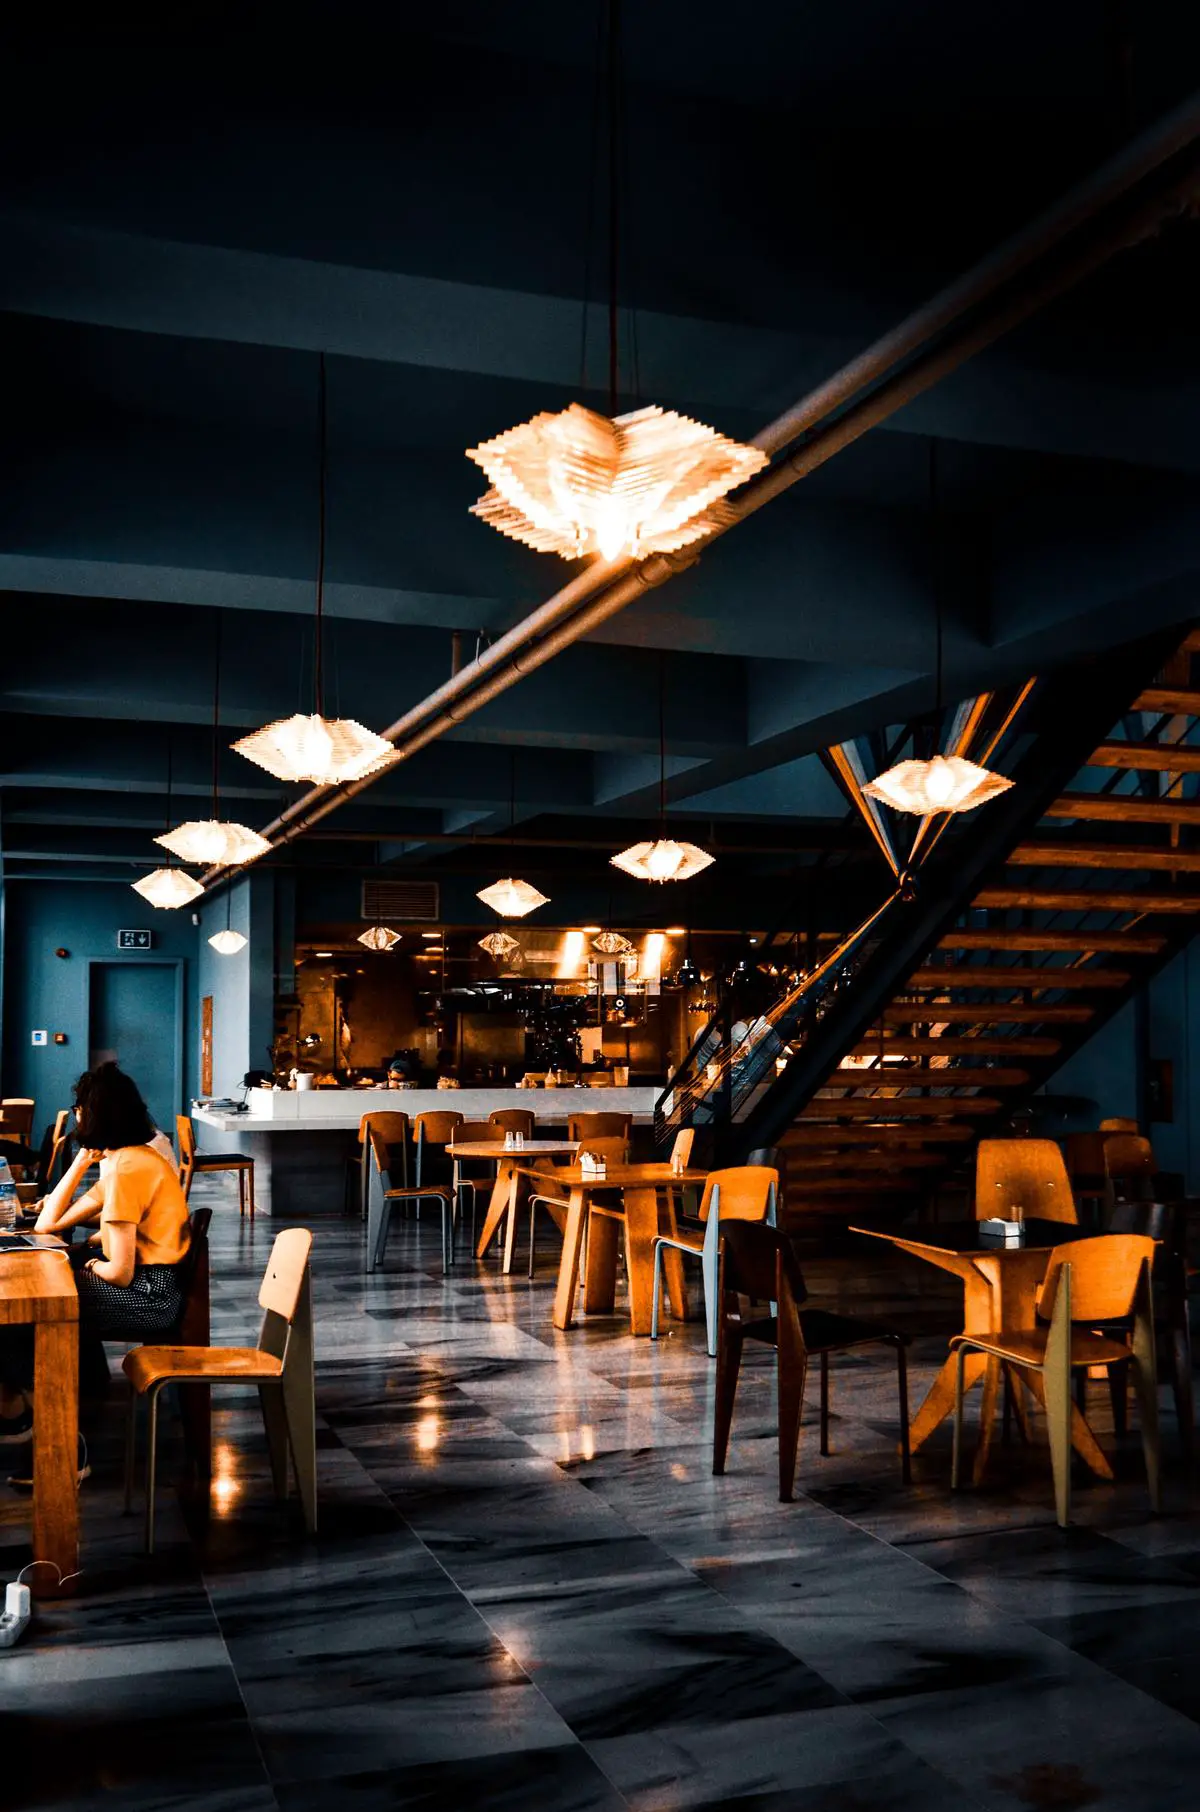 The image shows a spacious and well-lit restaurant with tables and chairs. It has a modern and welcoming interior design.